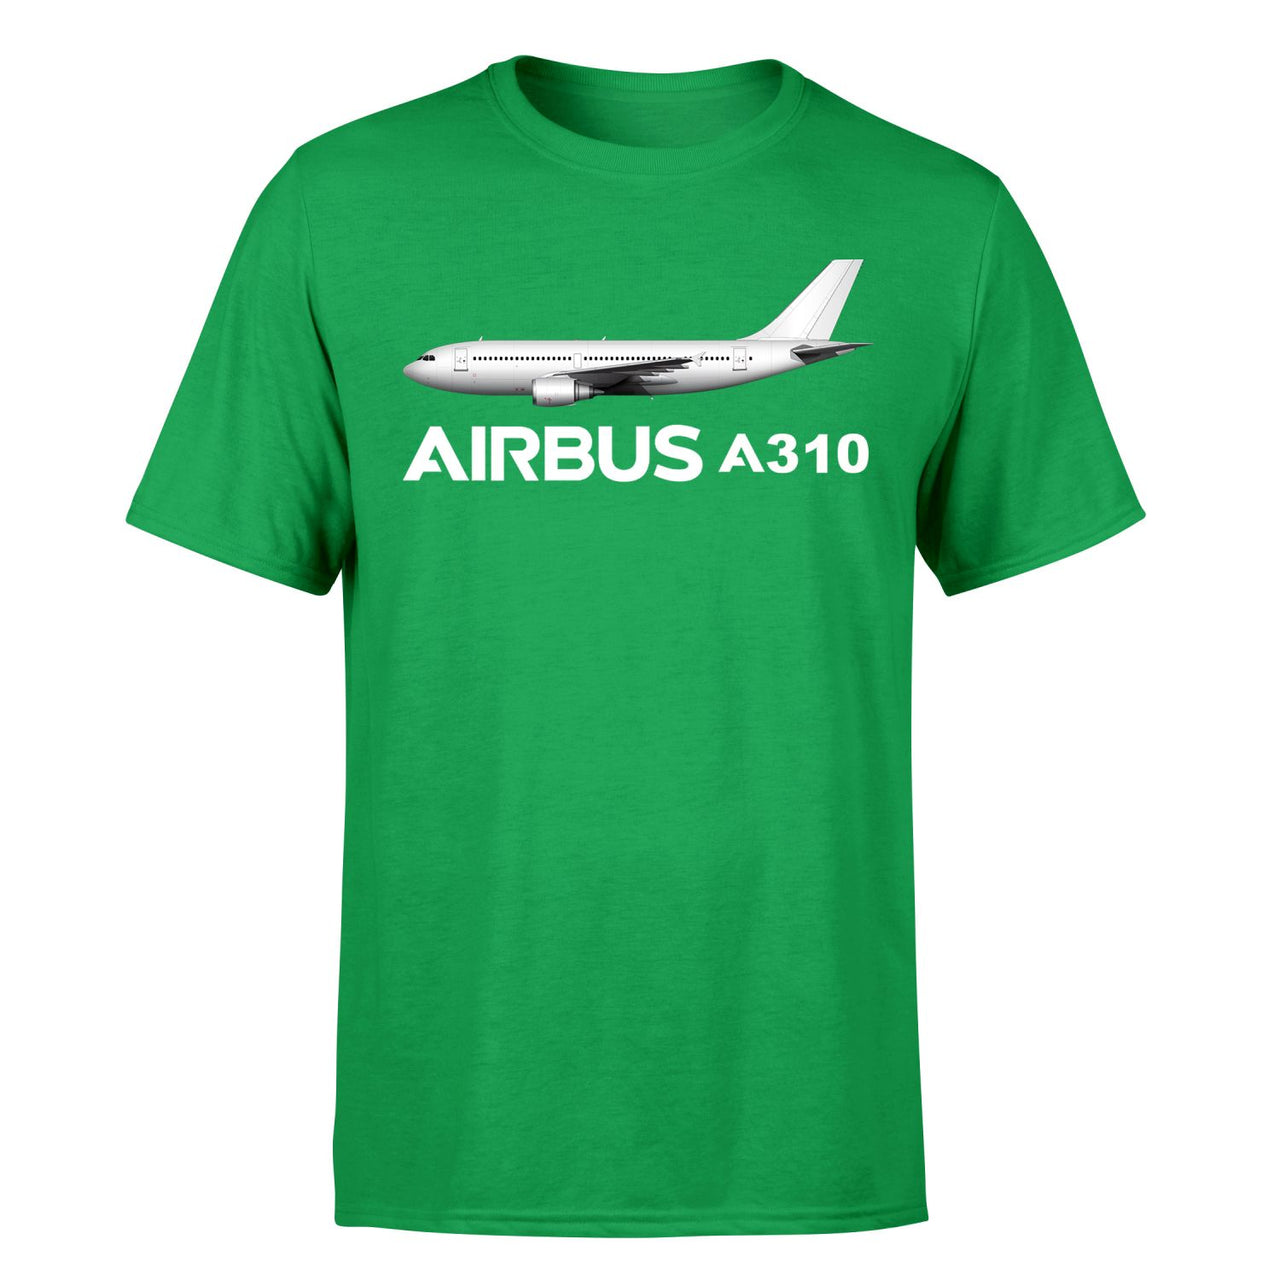 The Airbus A310 Designed T-Shirts